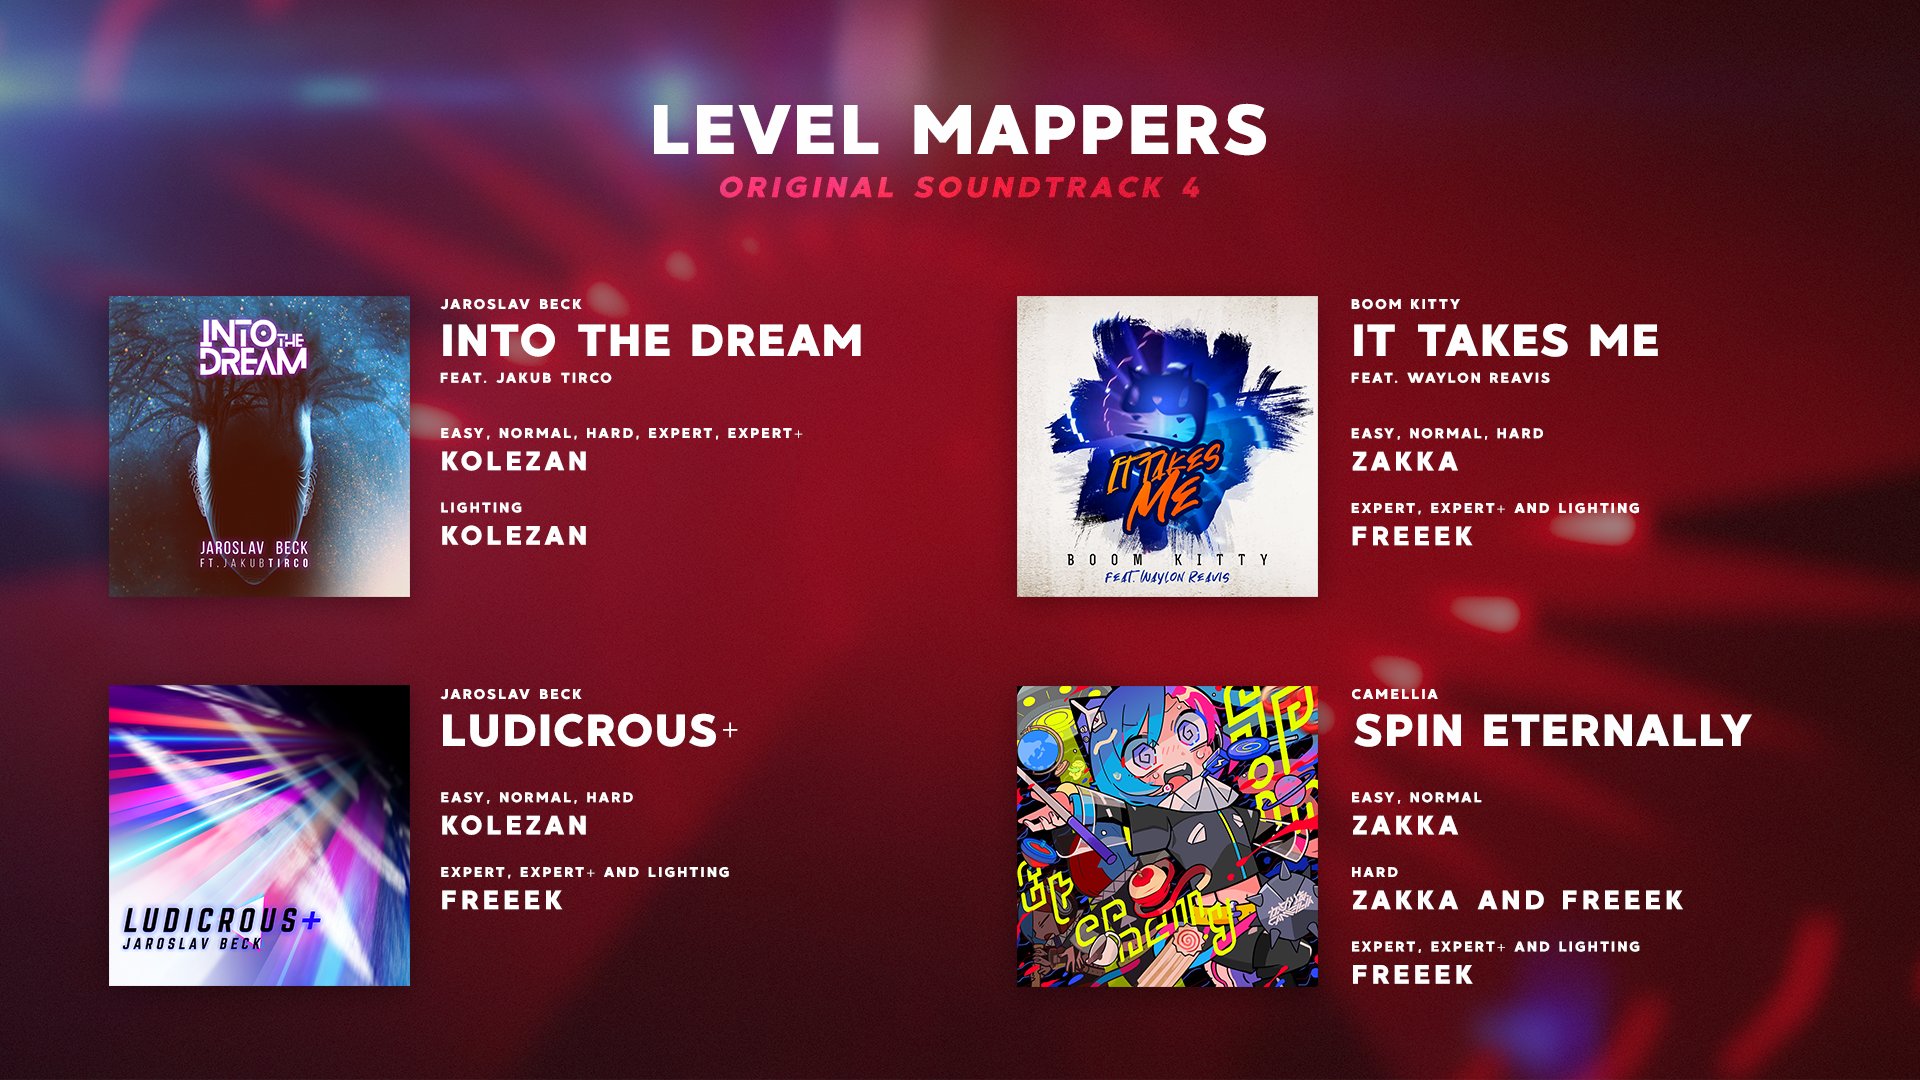 Beat Saber Twitter: "Who mapped which levels from the 🤔 Did you guess right? https://t.co/kuuiy9qnZg" / Twitter